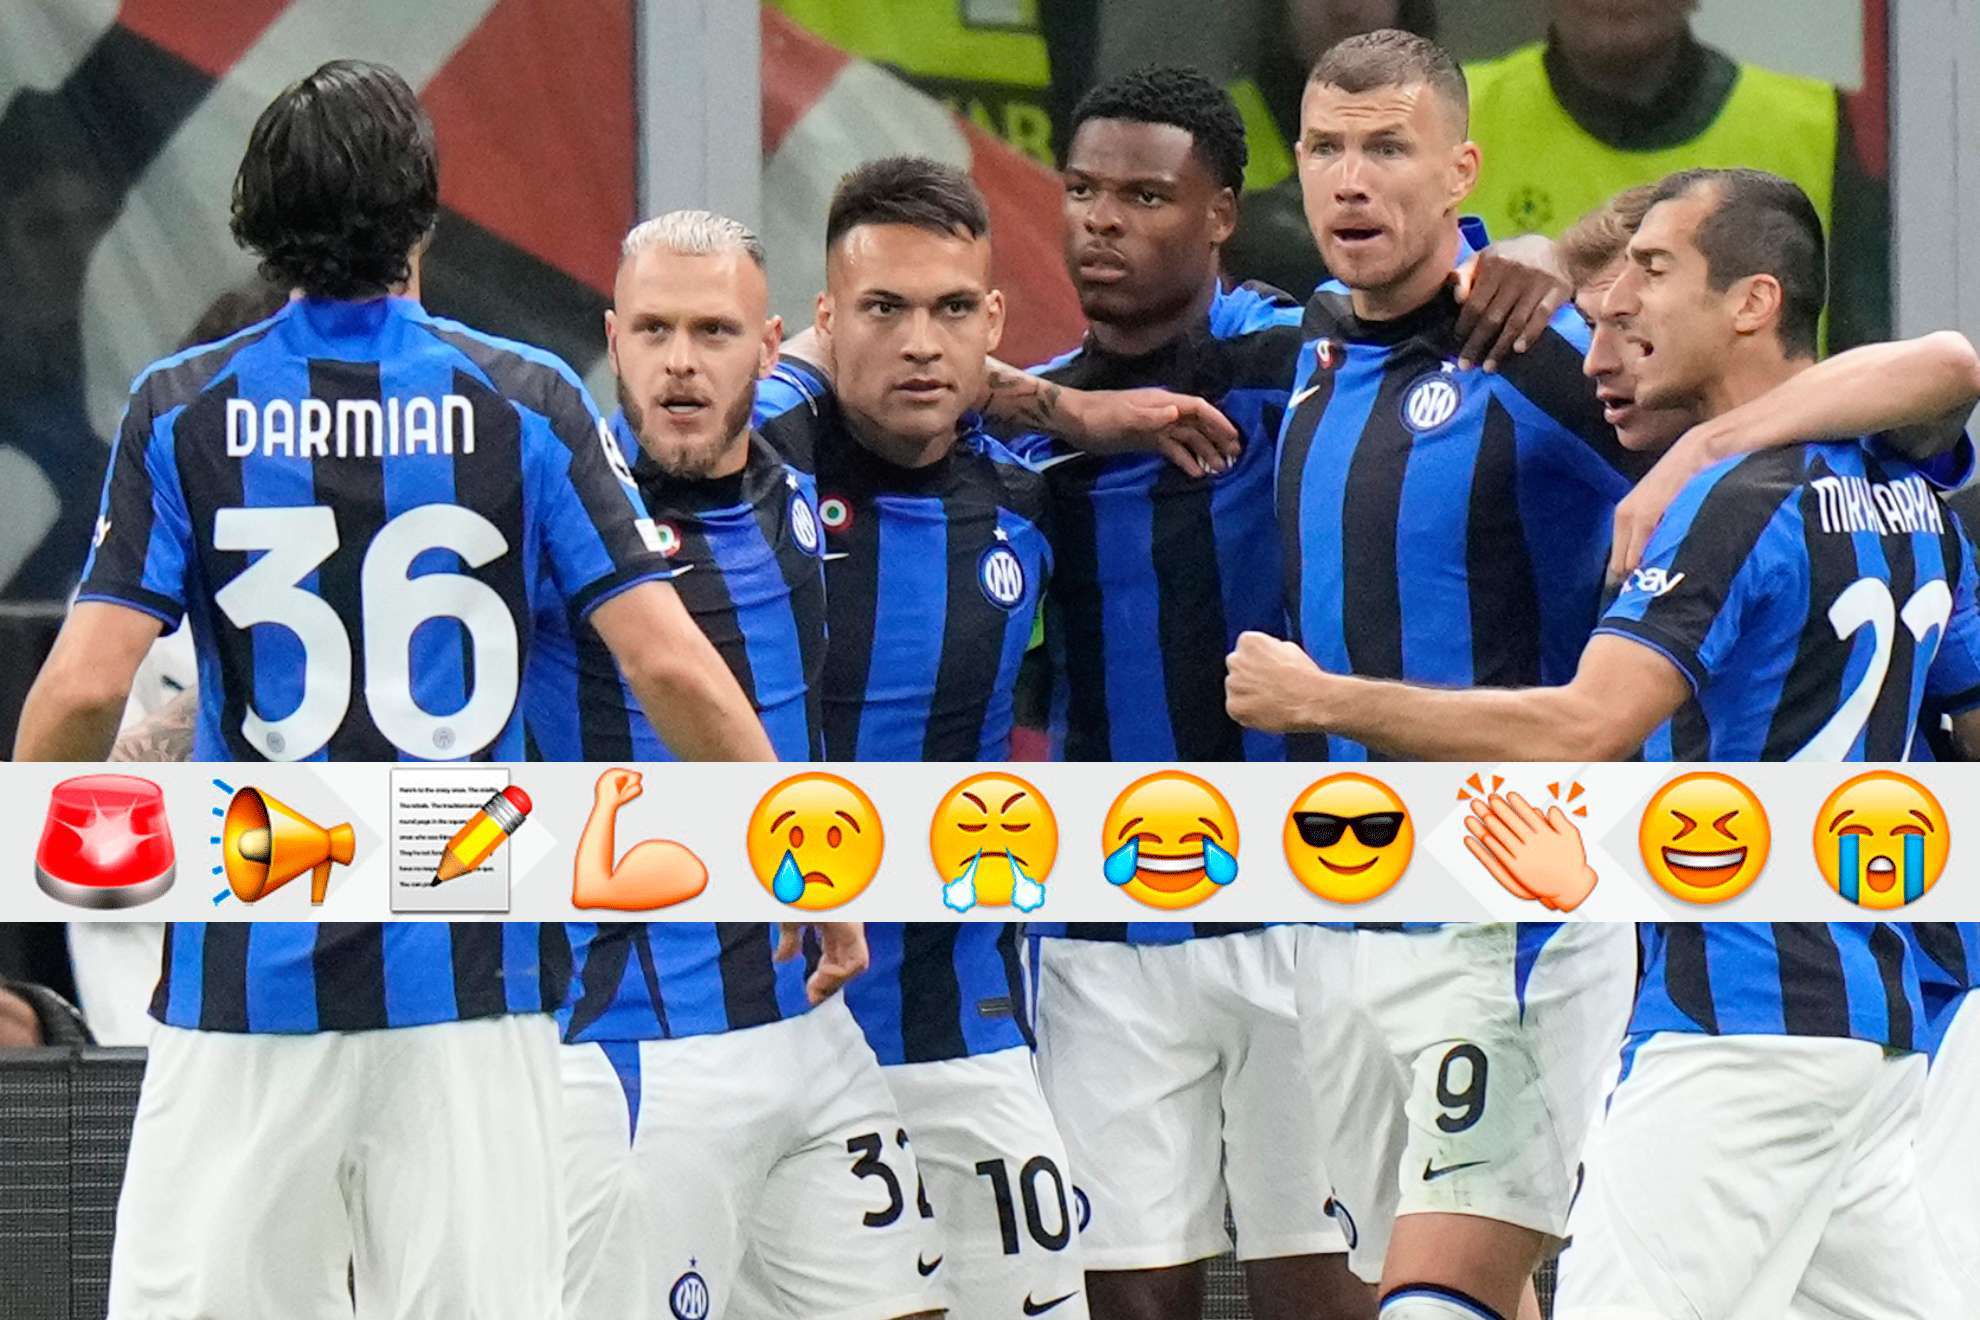 What if Inter end up winning this seasons Champions League?